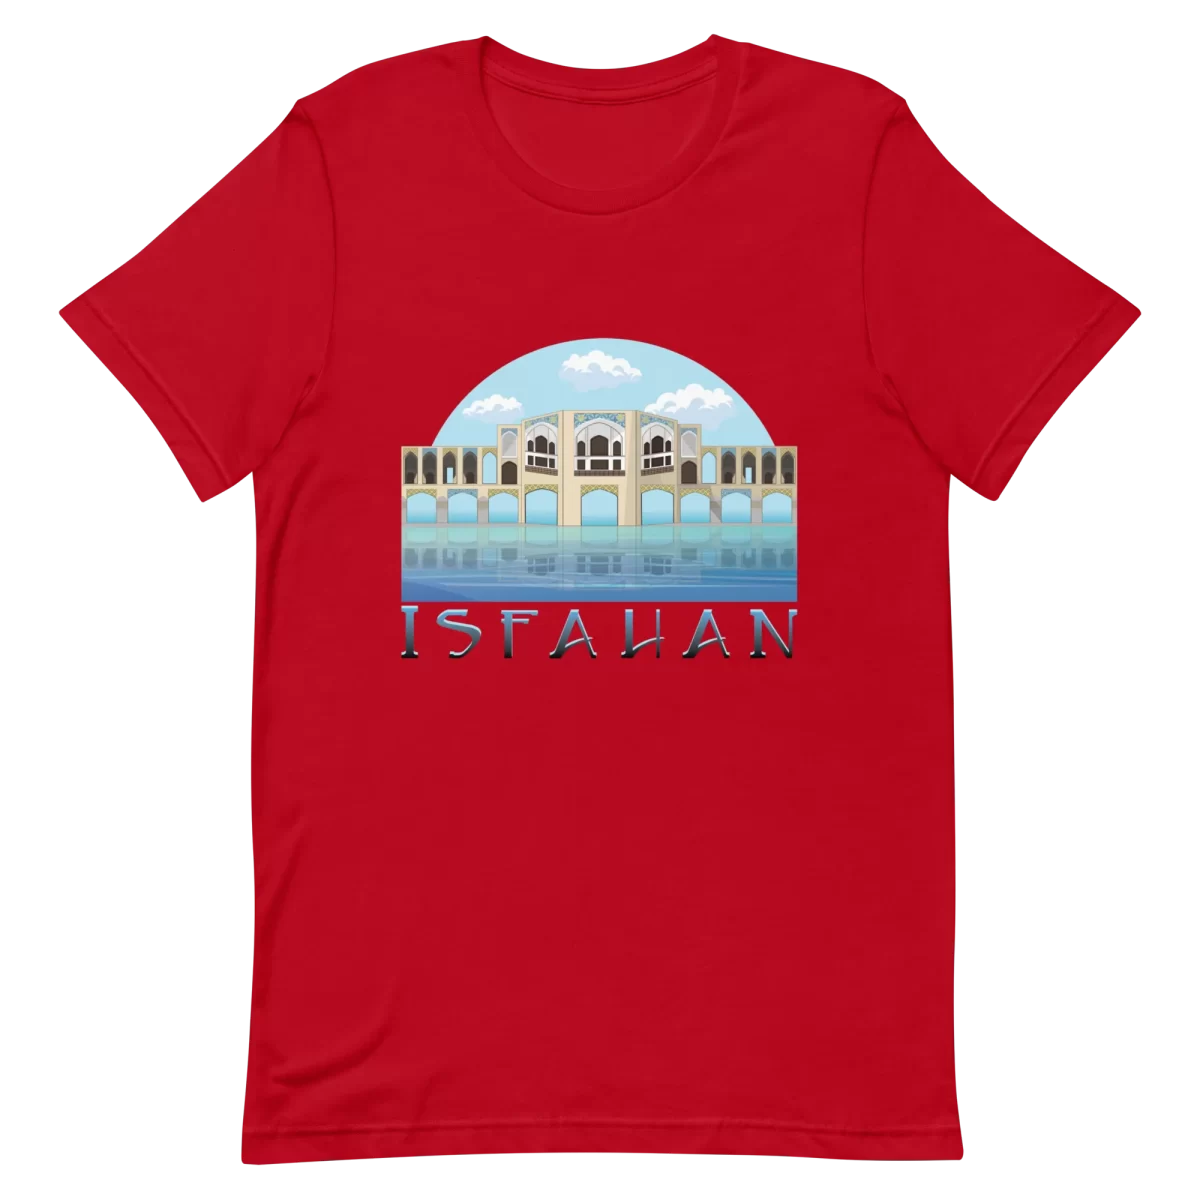 Unisex T-Shirt - ISFAHAN Red